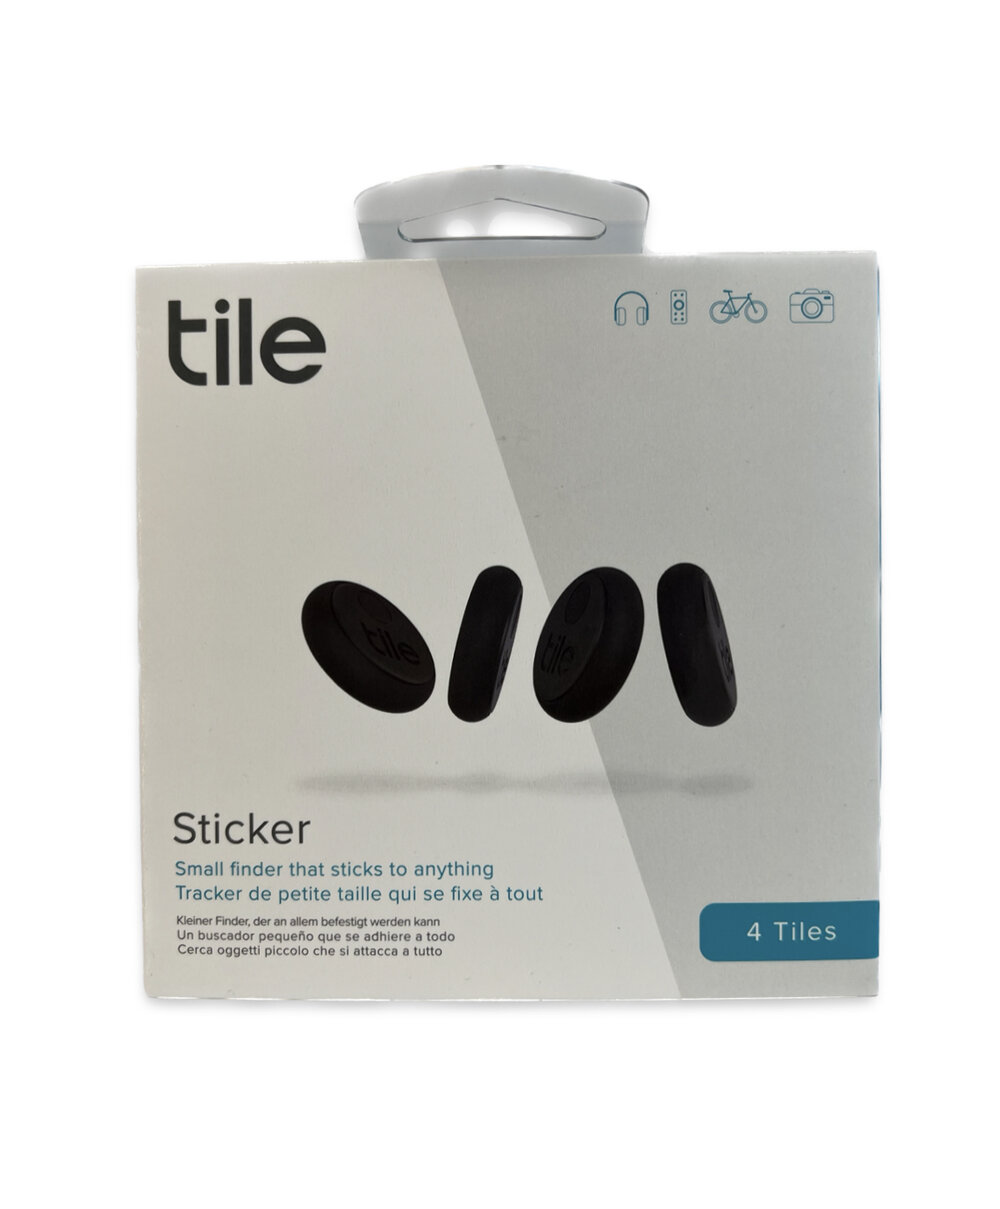 Tile Stickers - Adhesive Bluetooth Tracker Stickers, 4-PACK — Fashion Cents  Consignment & Thrift Stores in Ephrata, Strasburg, East Earl, Morgantown